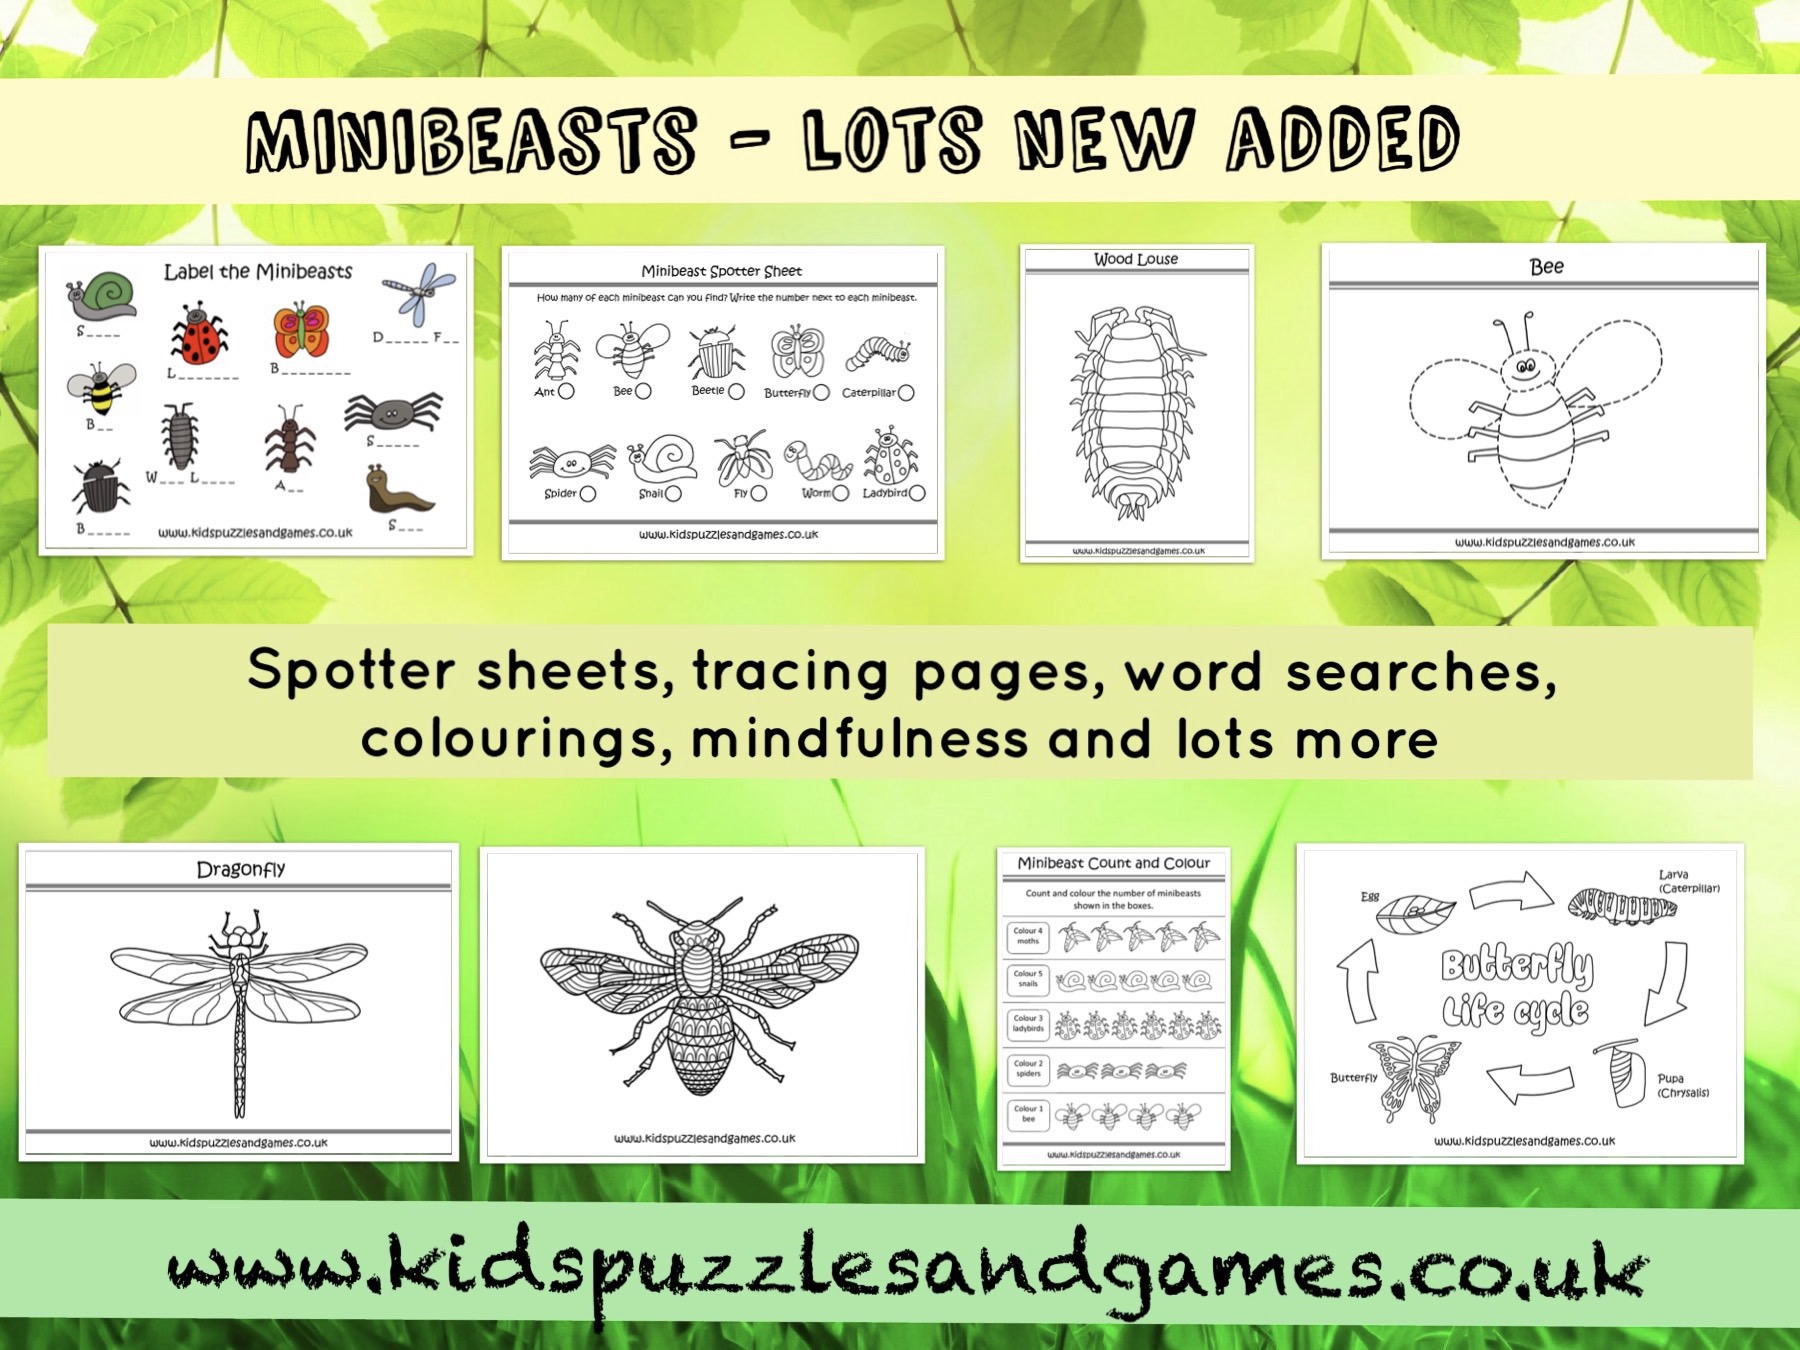 More added to our popular minibeasts theme 